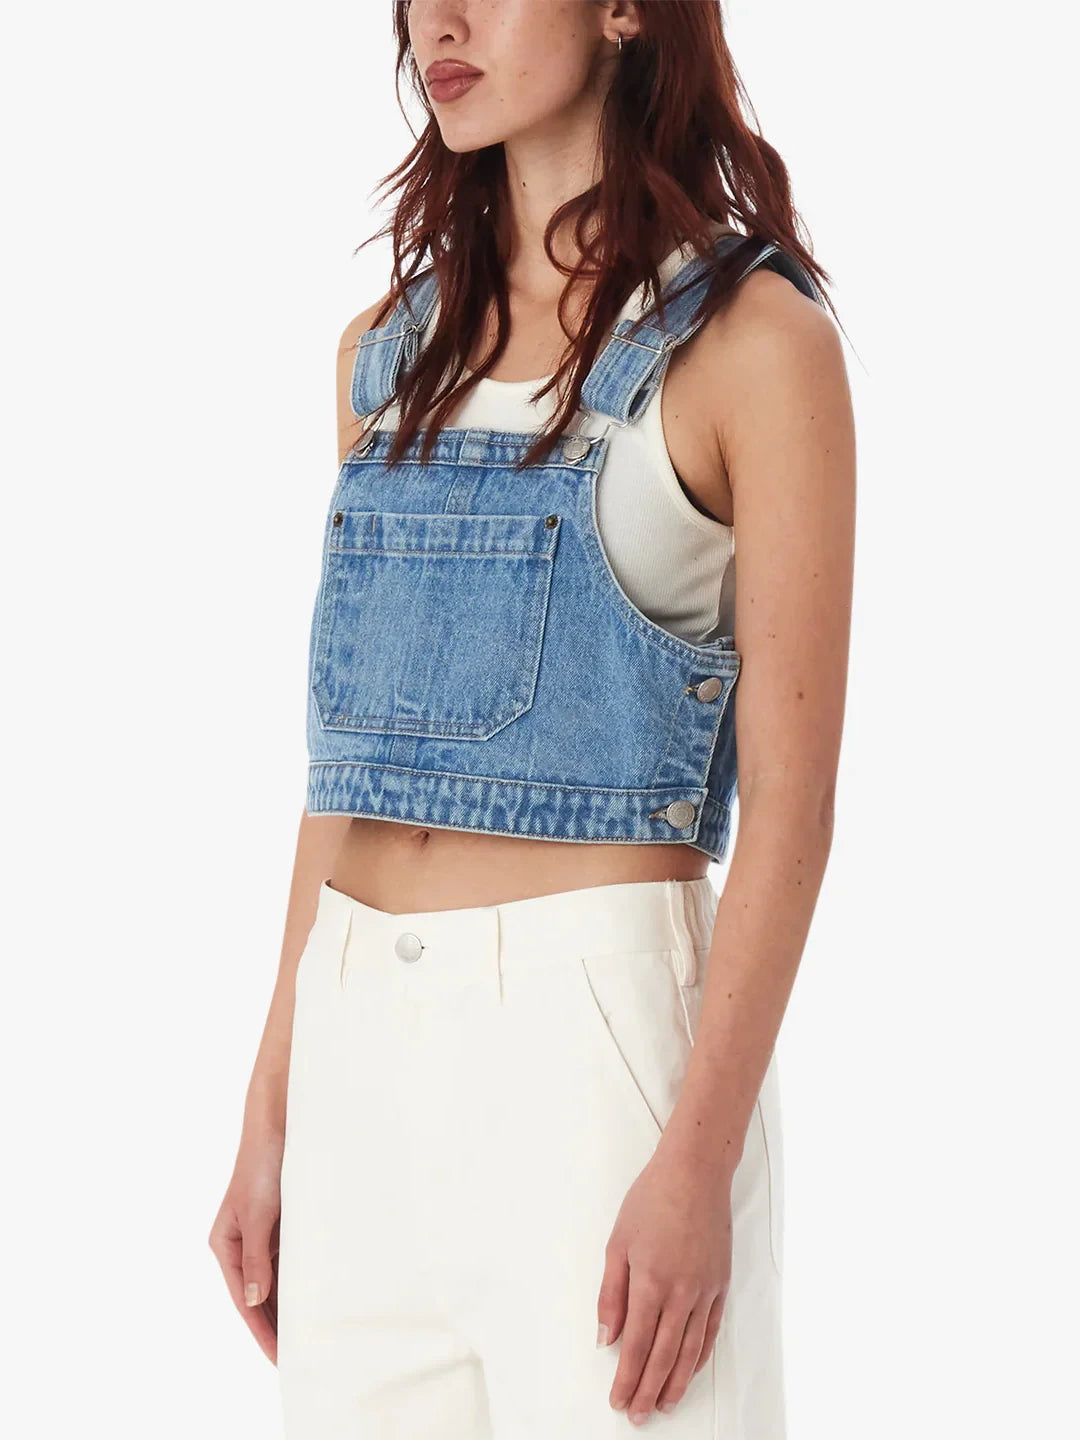 OBEY CROPPED OVERALL DENIM TOP LIGHT INDIGO